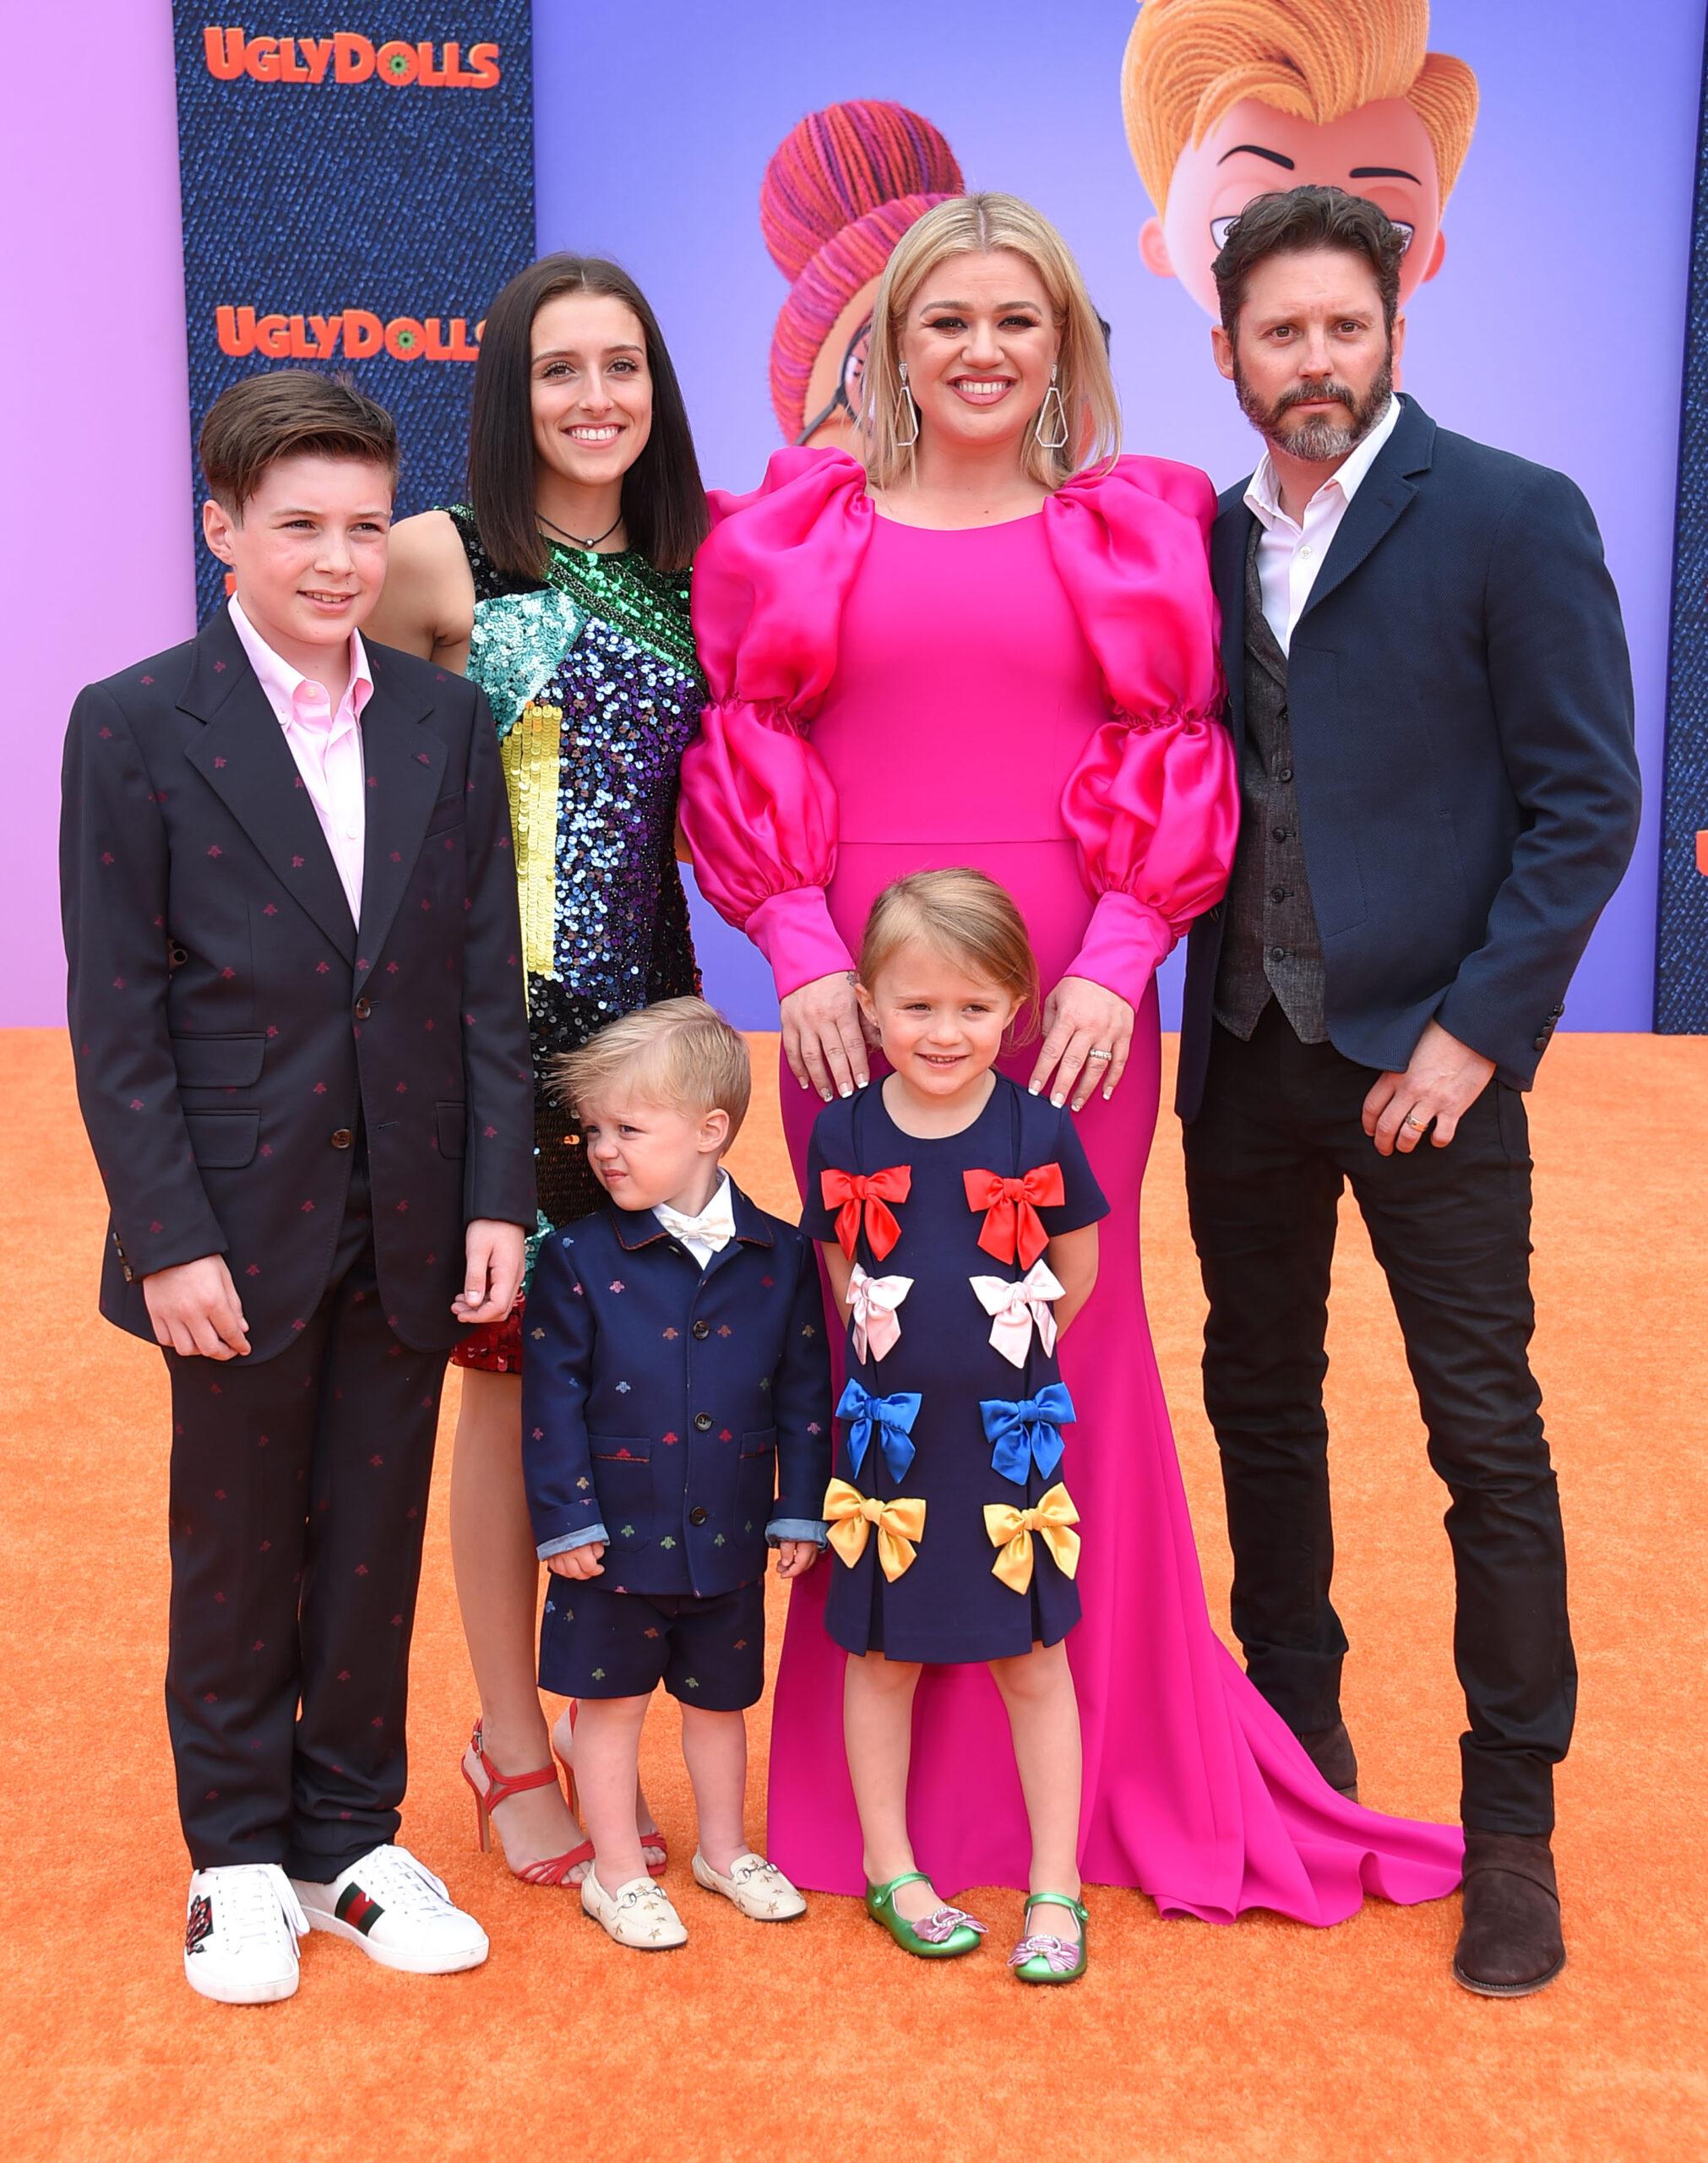 Kelly Clarkson Collects A HUGE Win In Ongoing Divorce With Brandon Blackstock